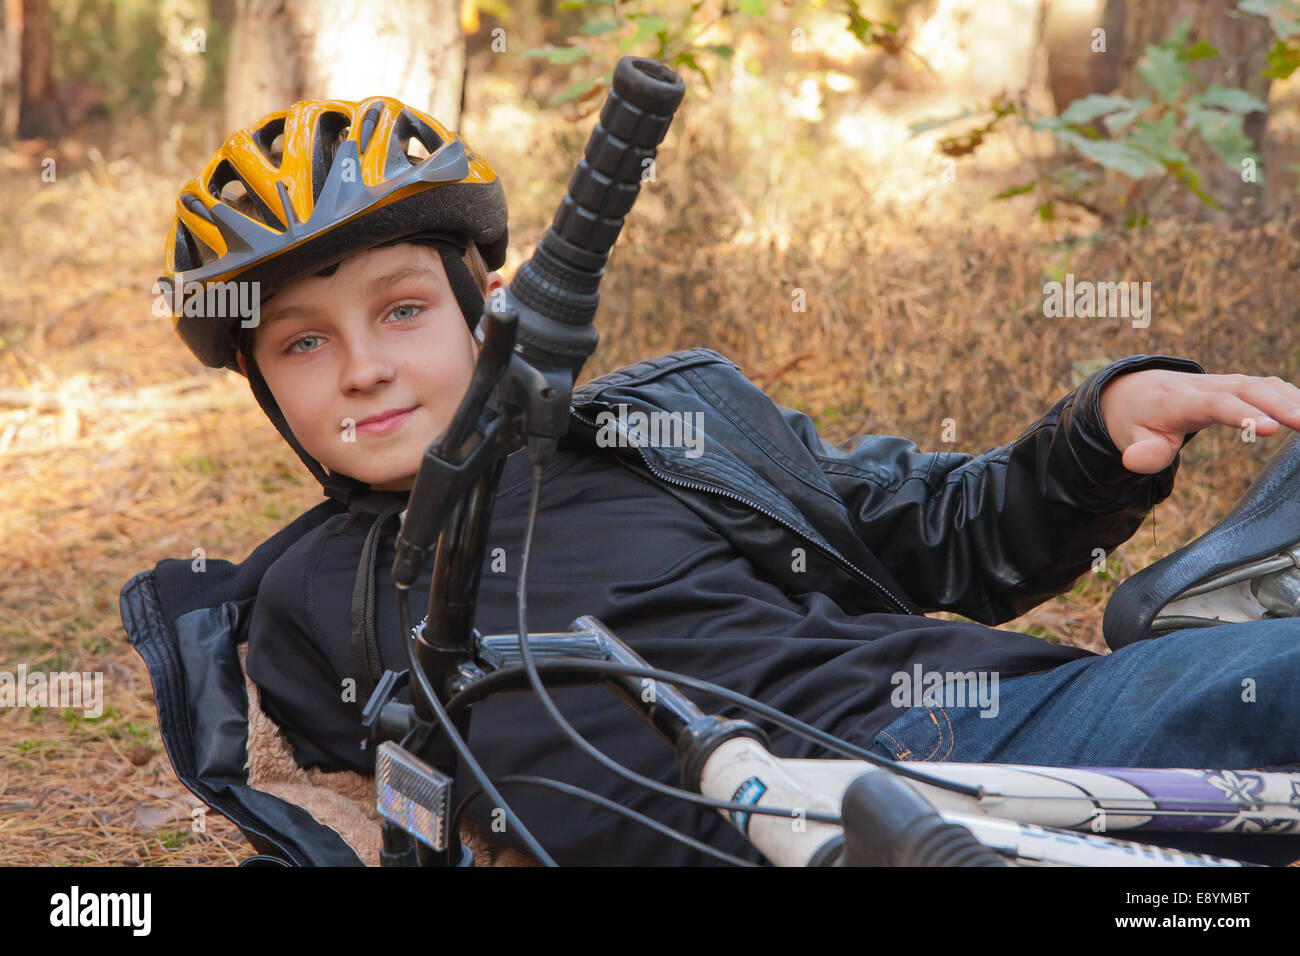 young boy in a bicycle helmet Stock Photo